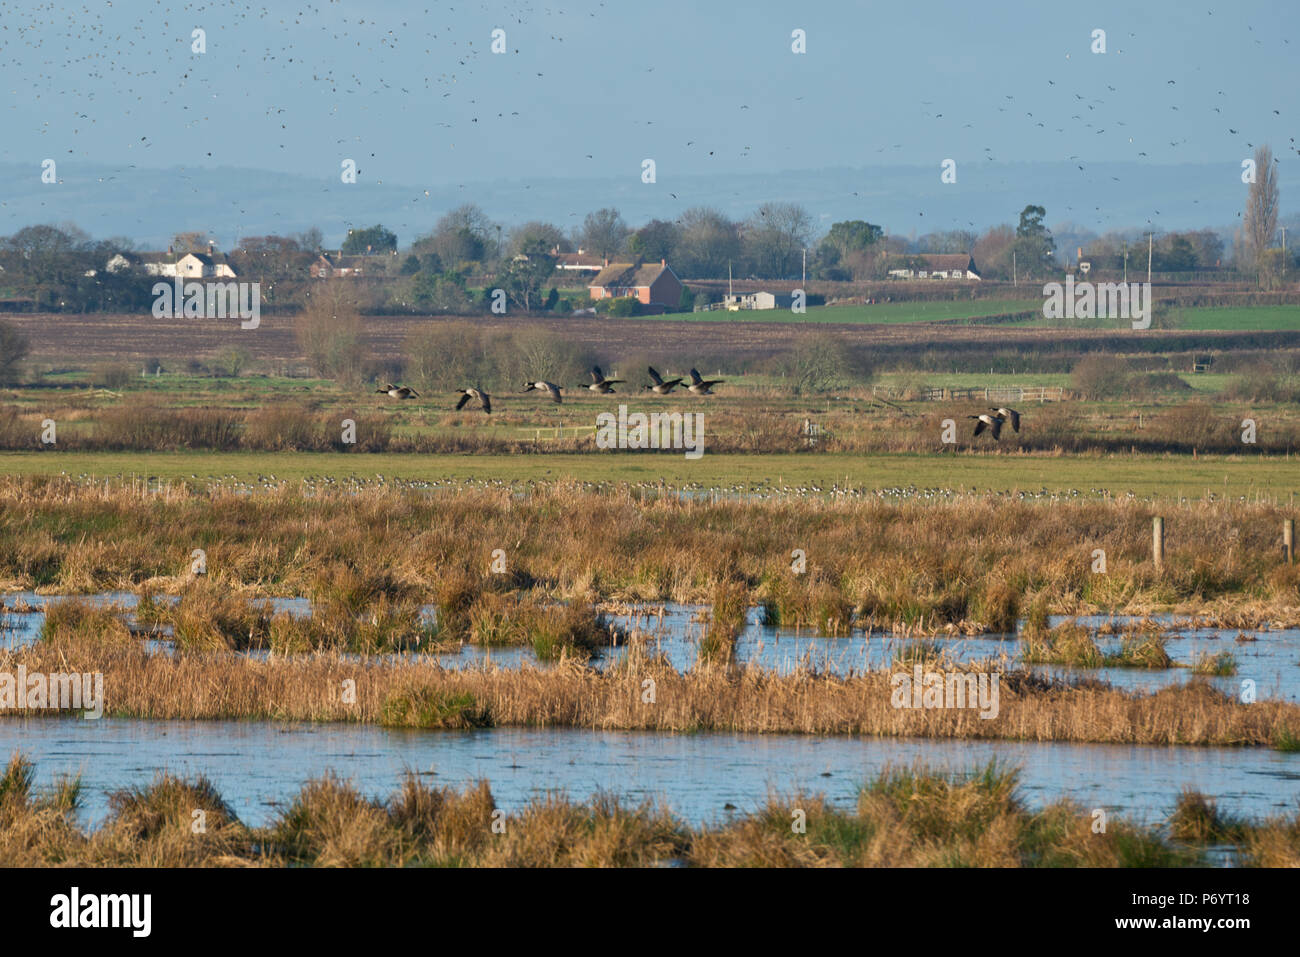 Flocks of waterfowl in flight and on the water at PSPB Nature Reserve at West Sedge Moor on the Somerset Levels during their Big Wetland Duck Watch Stock Photo